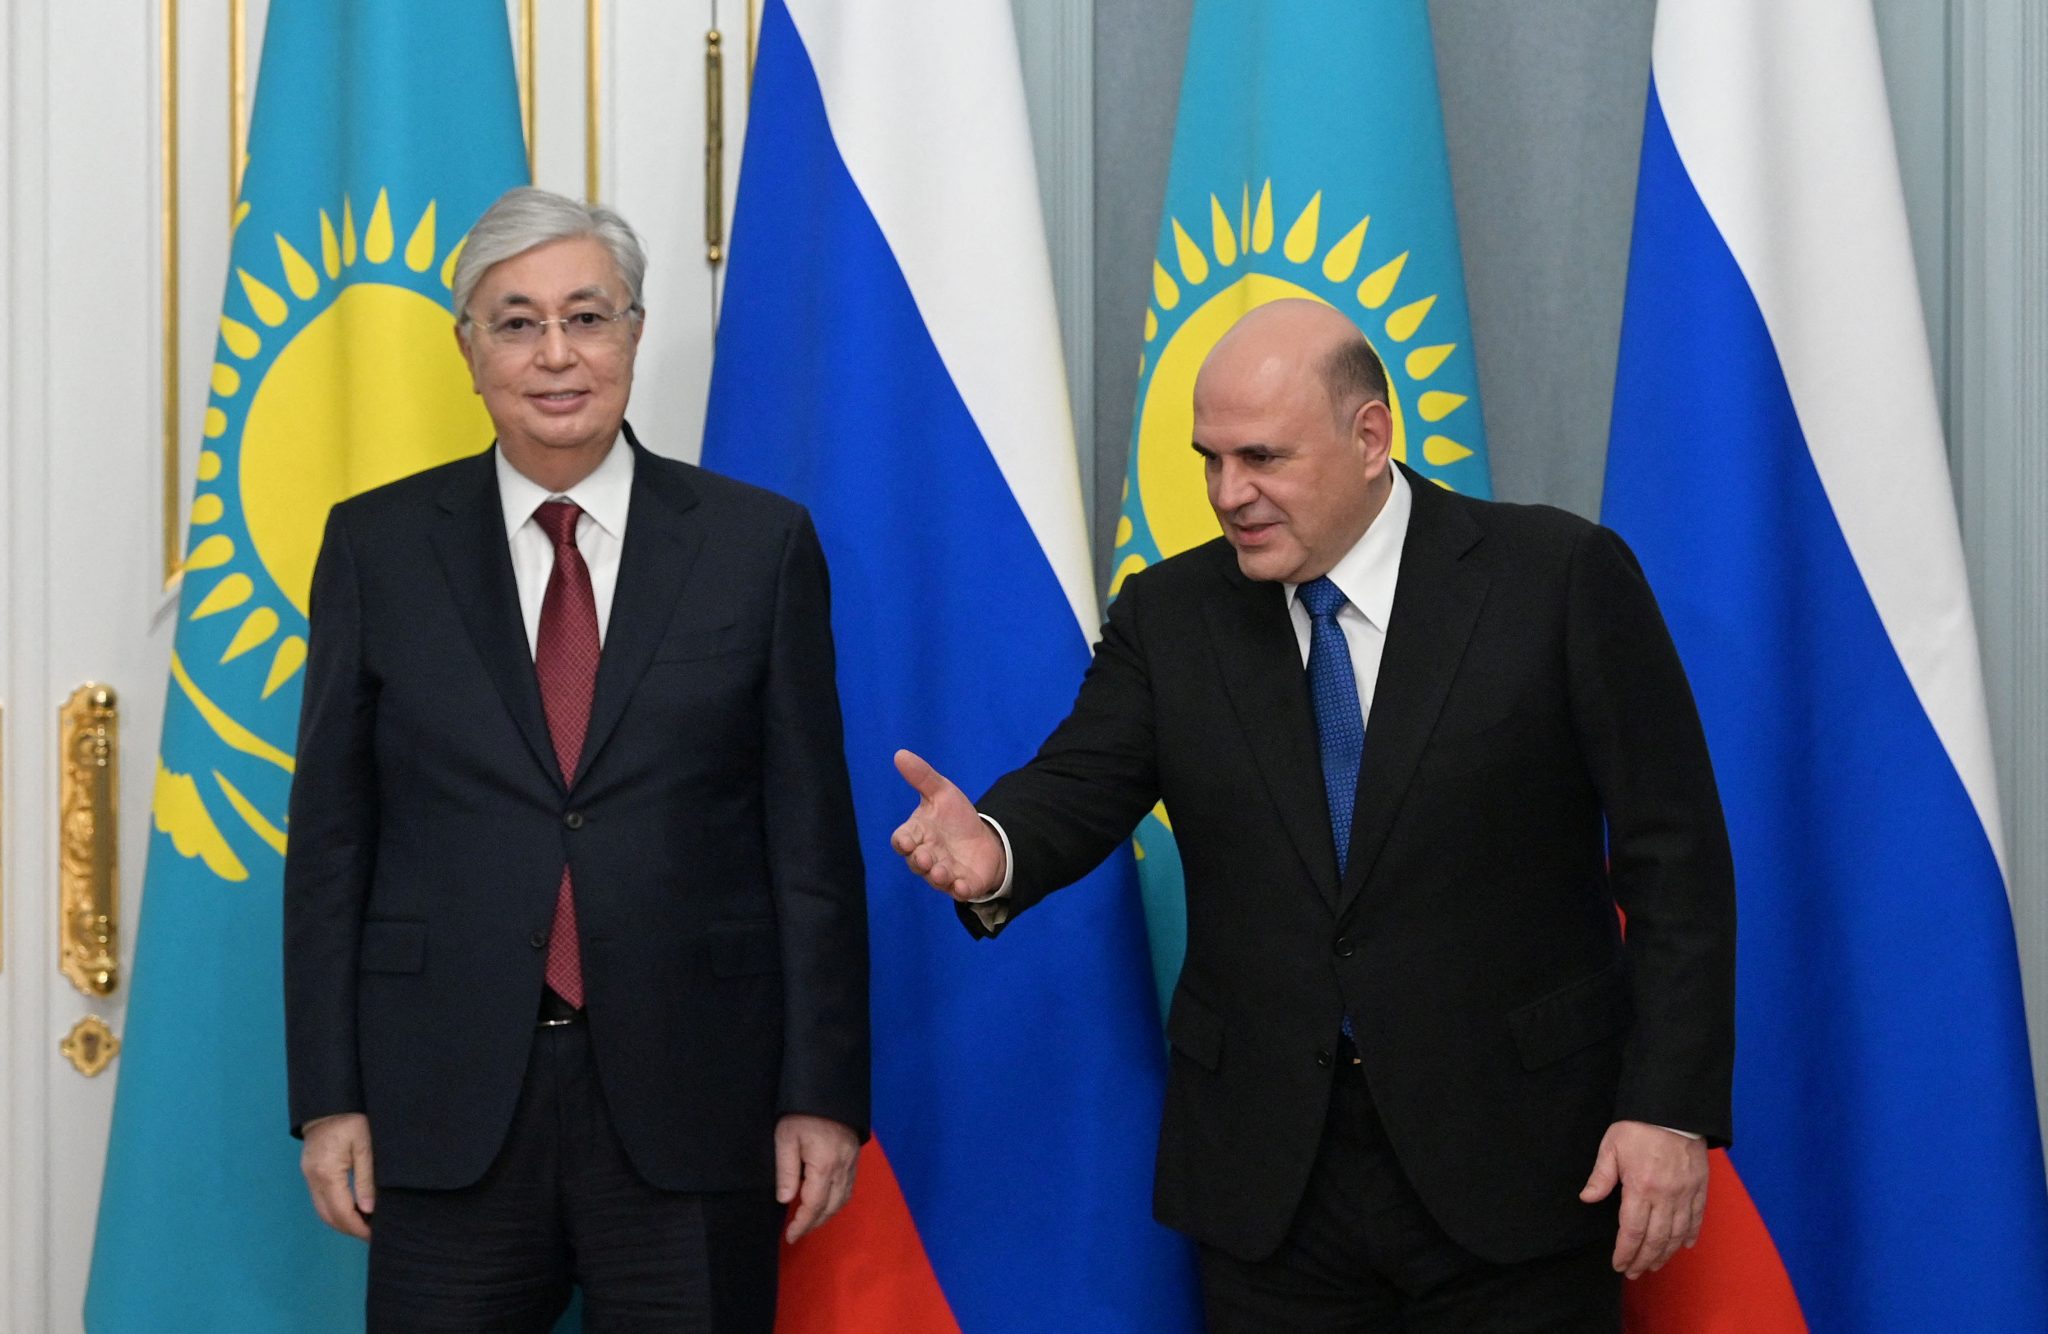 Strained ties with Russia boost prospects for Central Asian